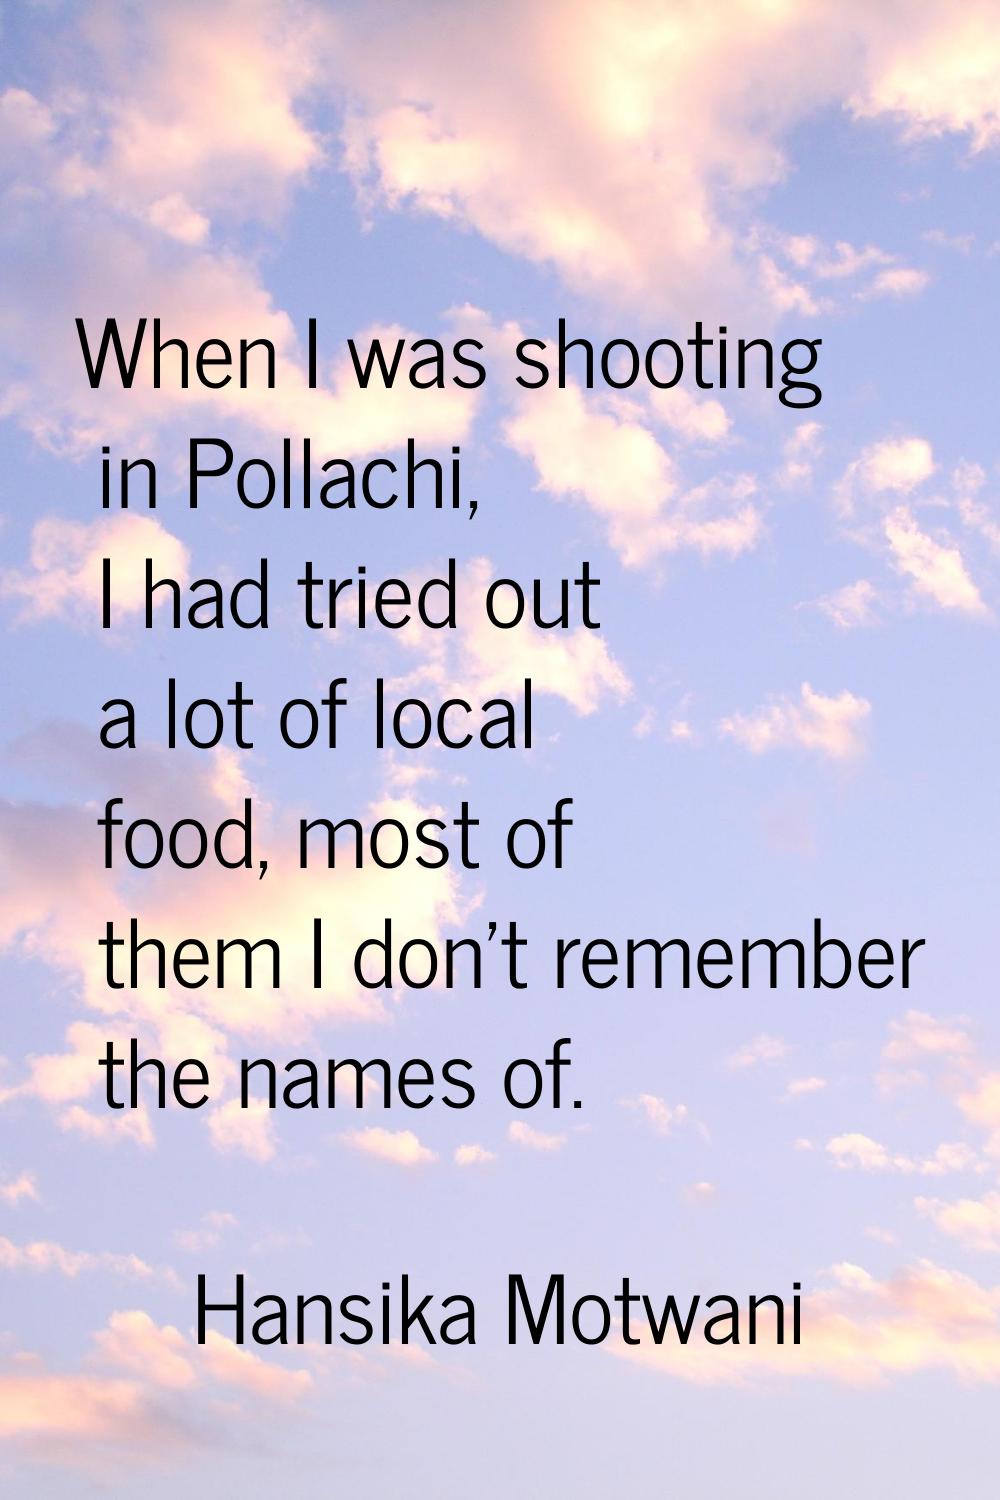 When I was shooting in Pollachi, I had tried out a lot of local food, most of them I don't remember